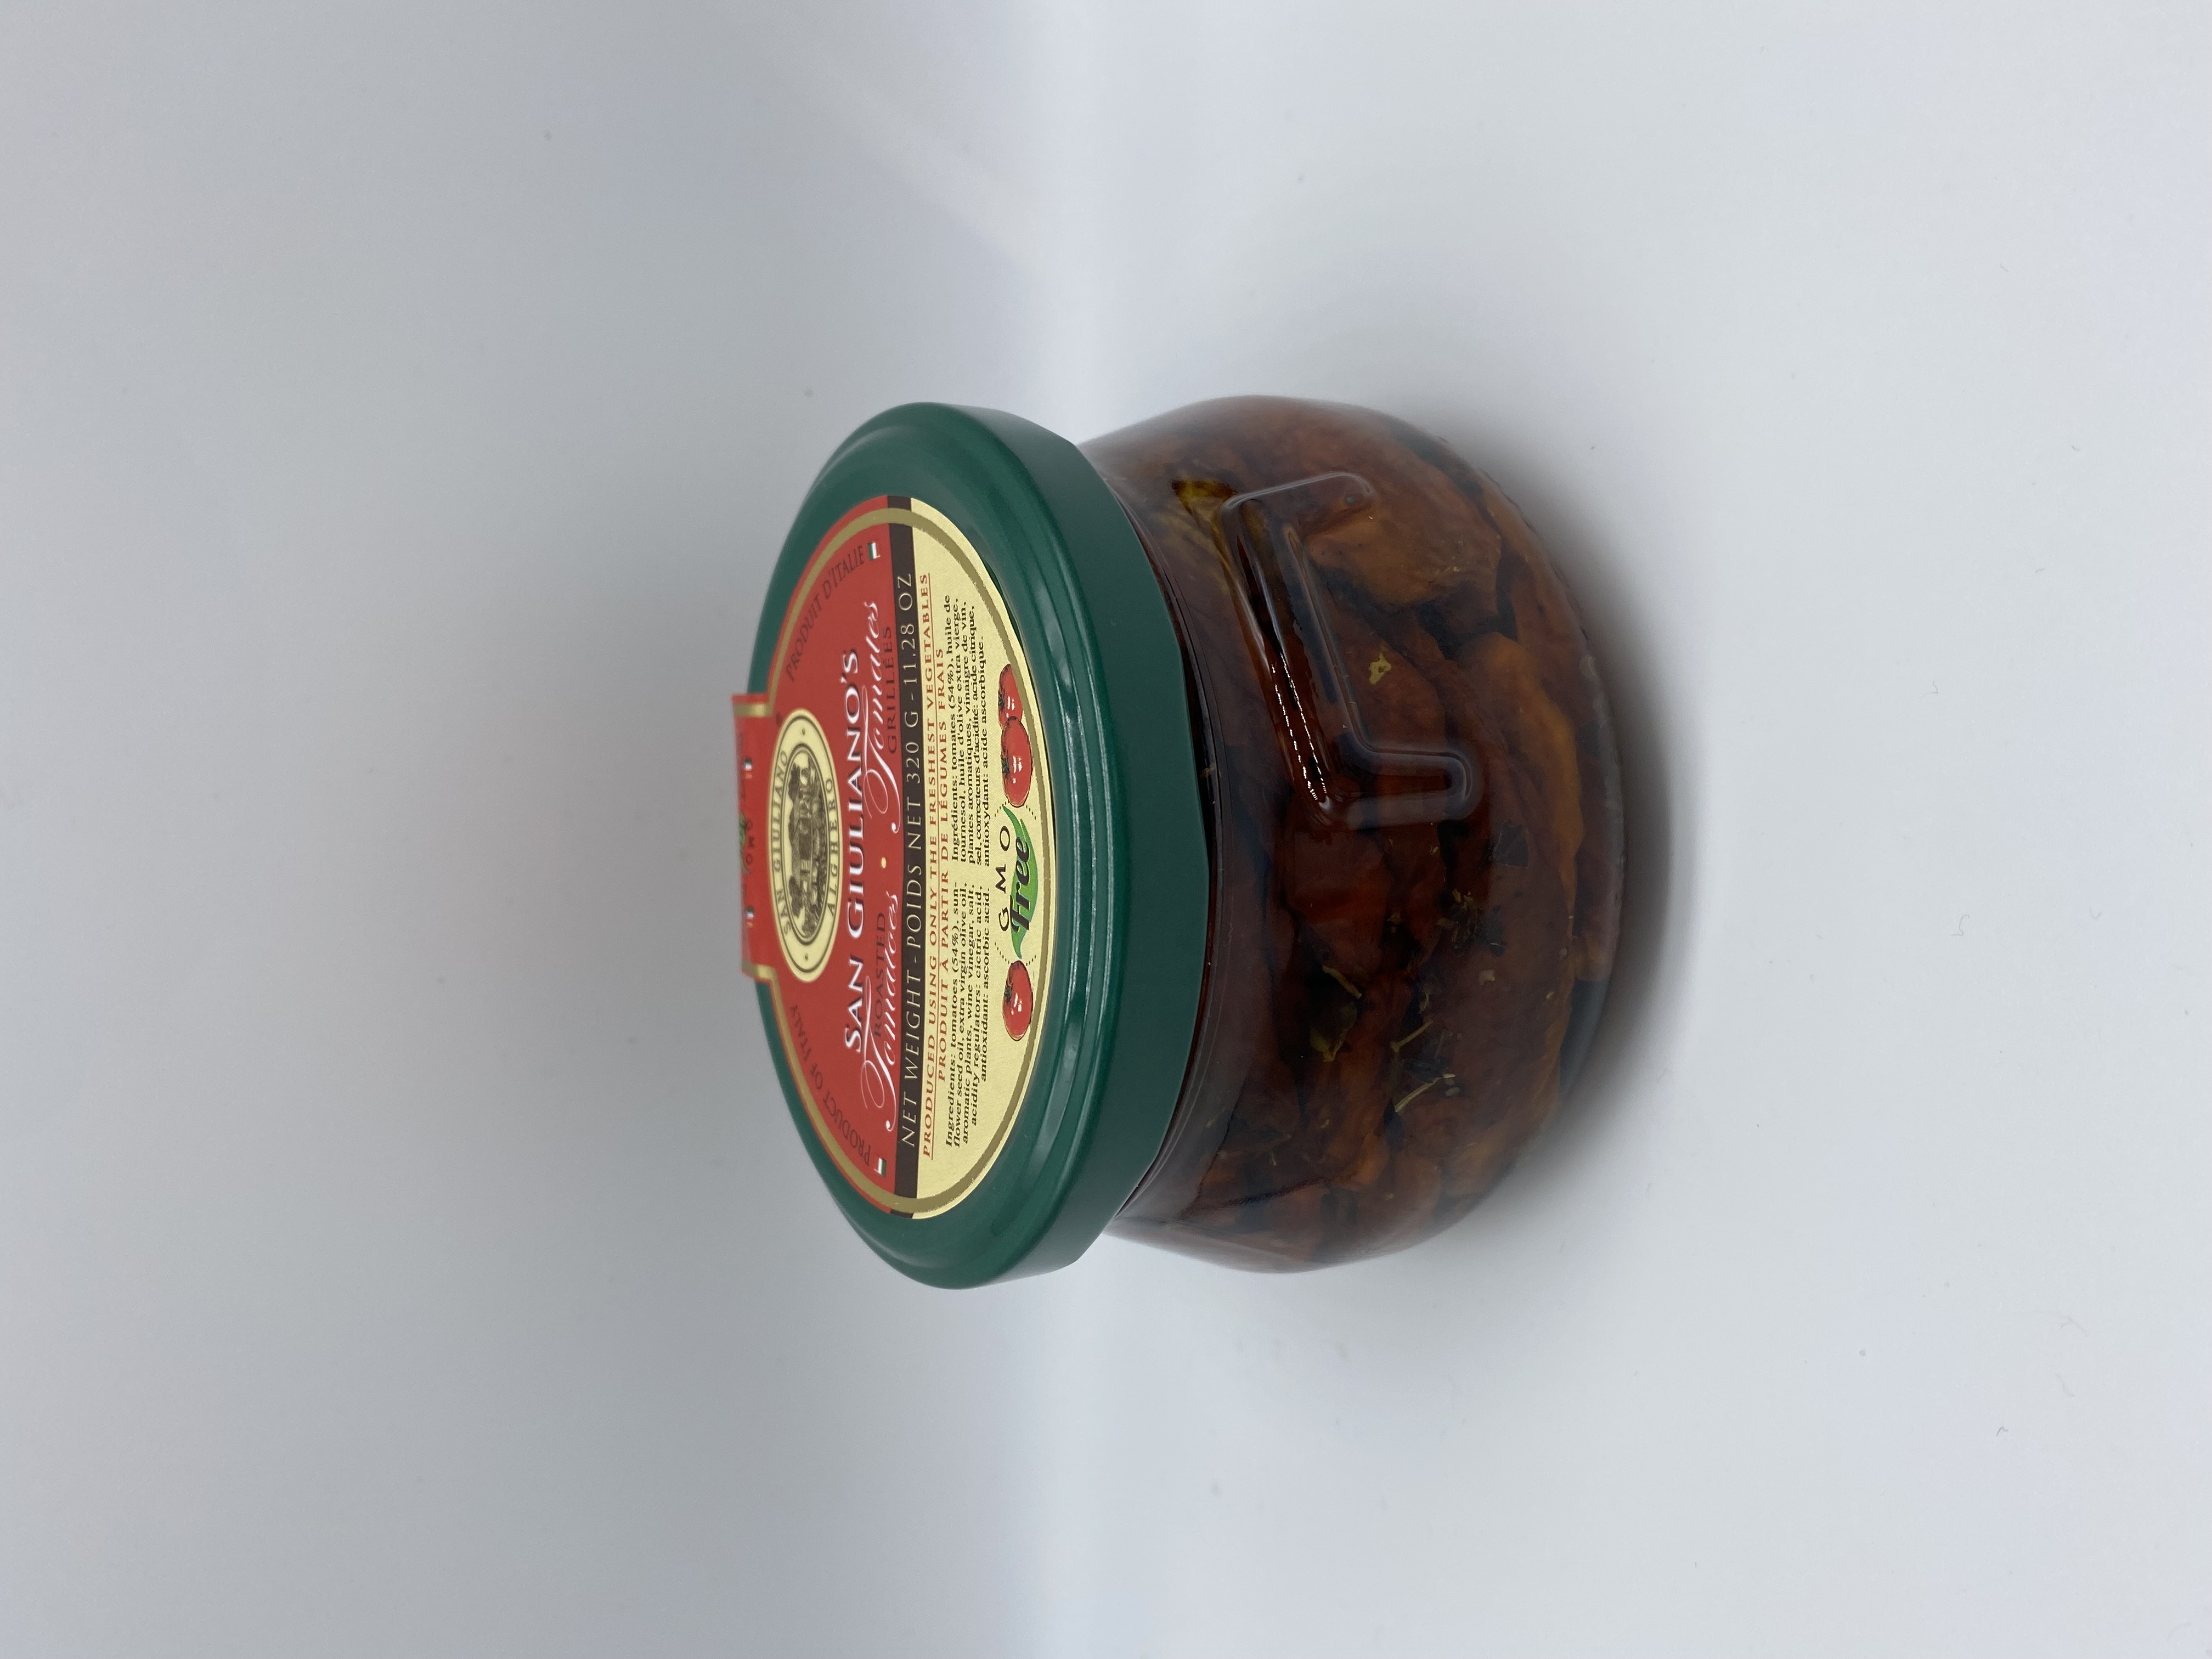 Product Image for Sundried Tomatoes